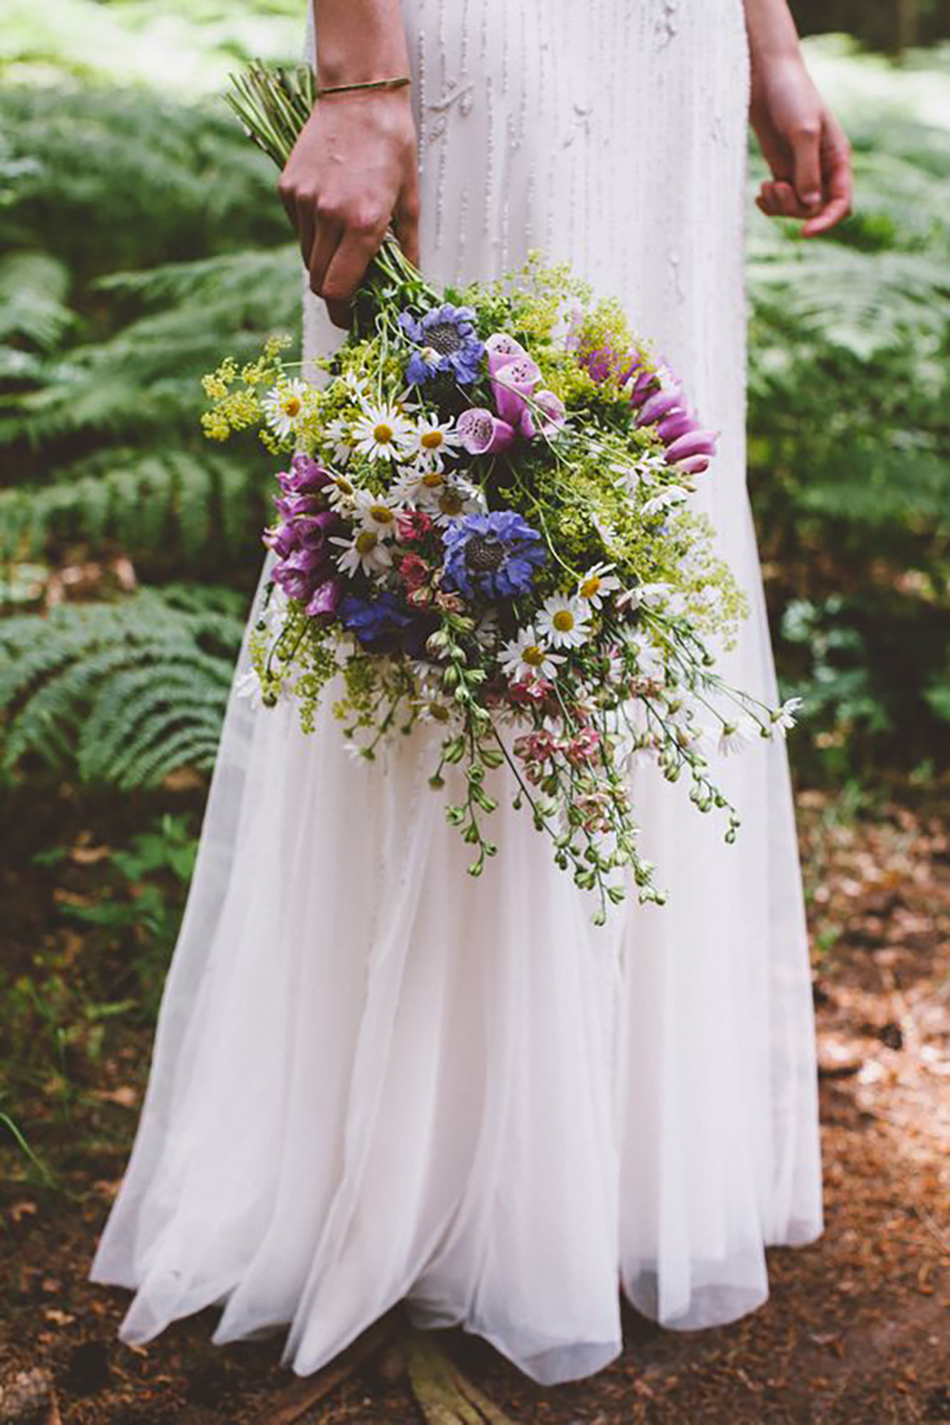 Bring the outside in with your wedding flowers